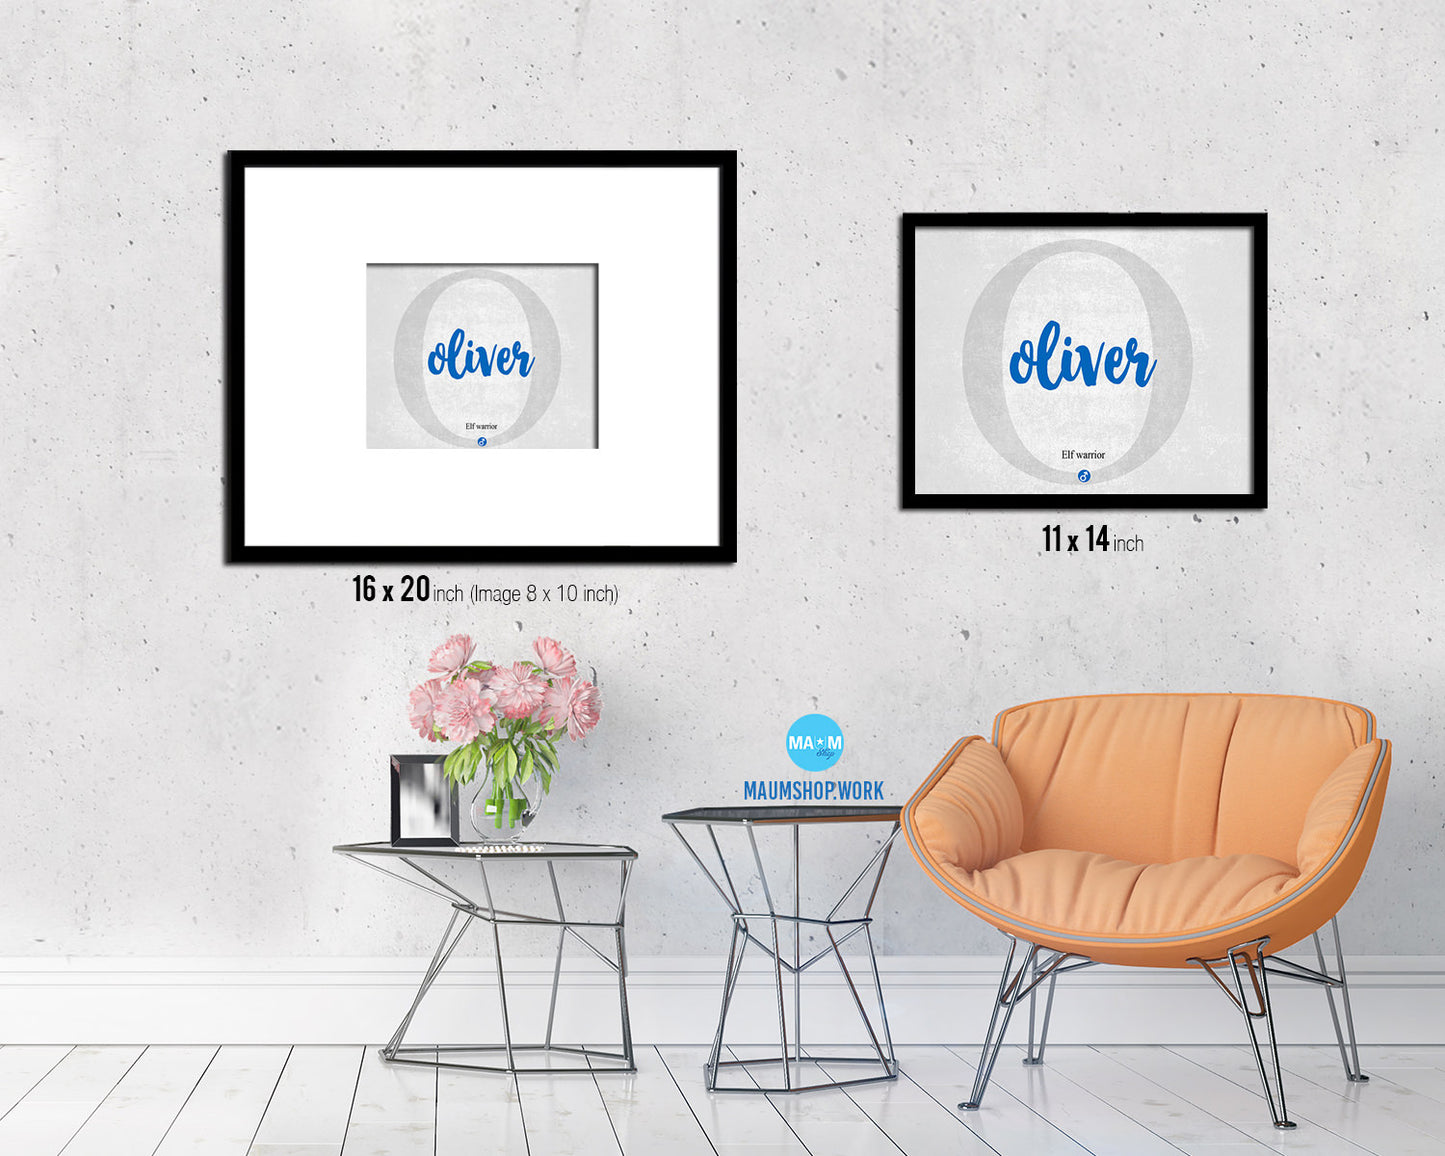 Oliver Personalized Biblical Name Plate Art Framed Print Kids Baby Room Wall Decor Gifts